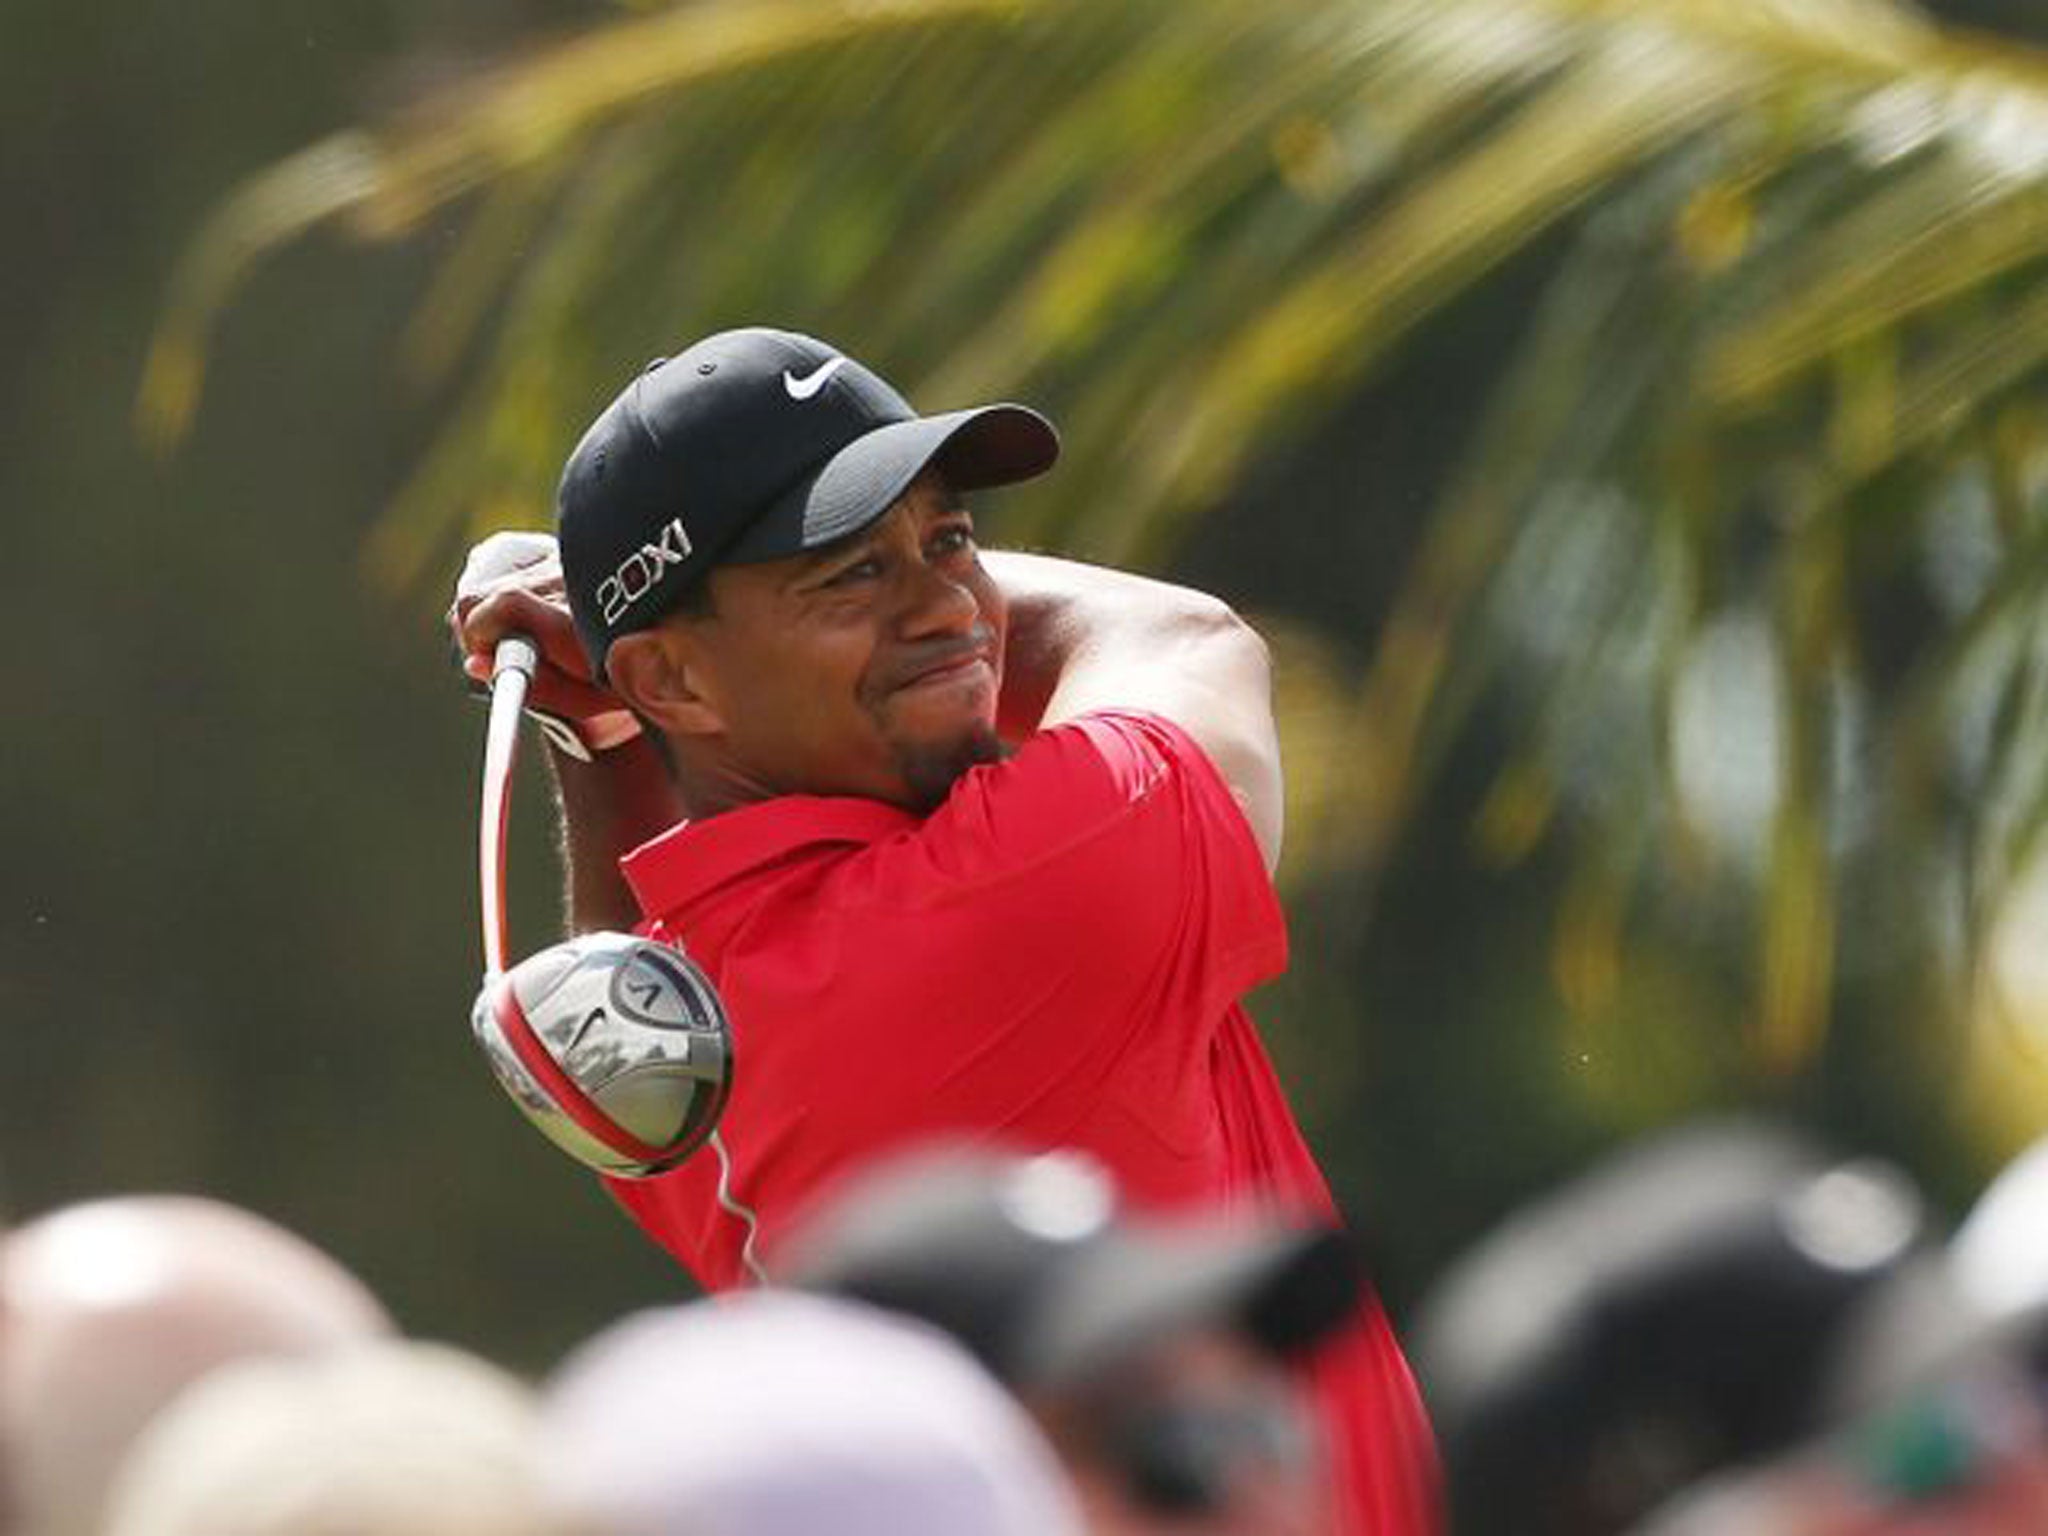 Tiger Woods dominated from start to finish in Miami